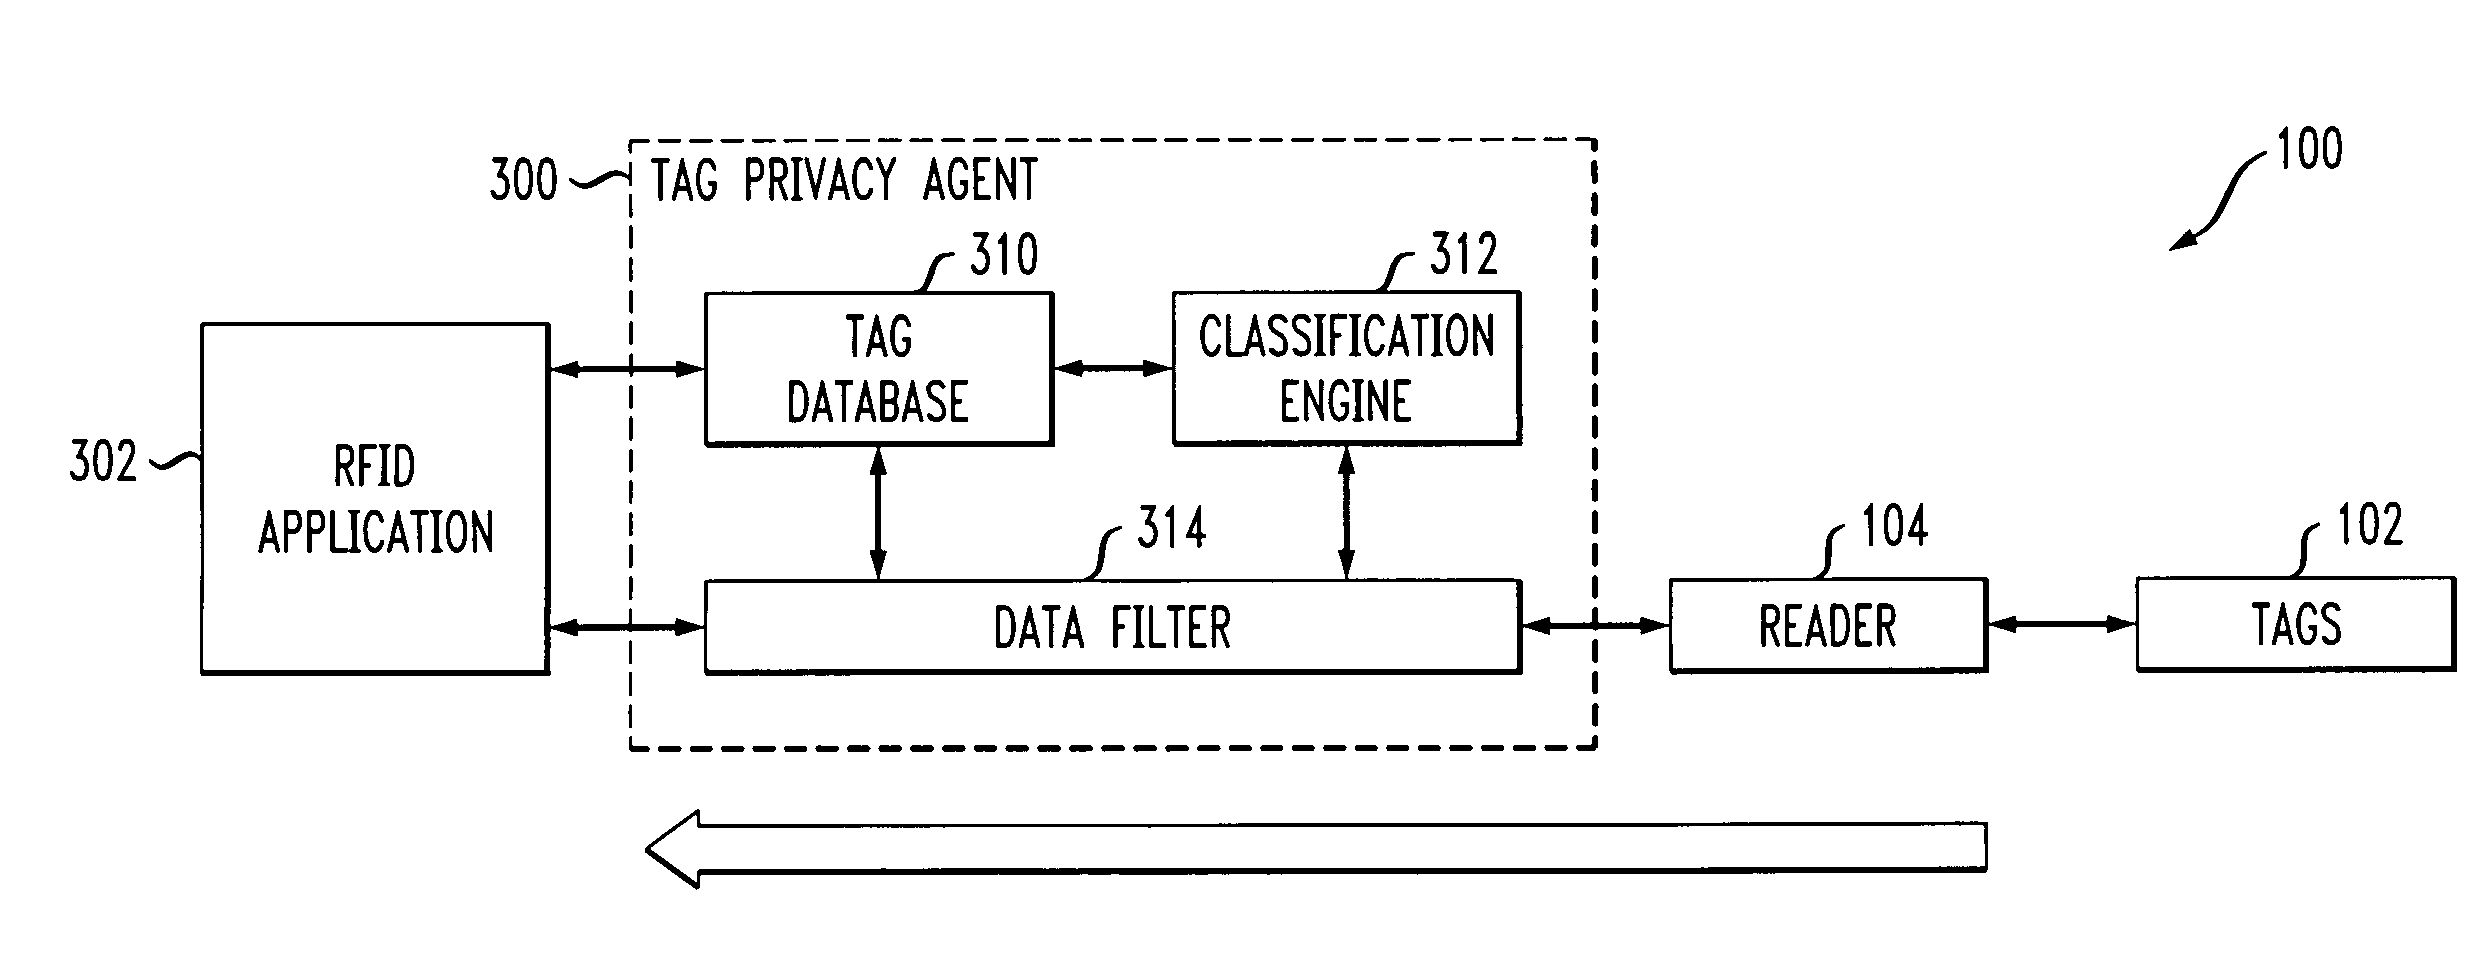 Radio frequency identification system with privacy policy implementation based on device classification